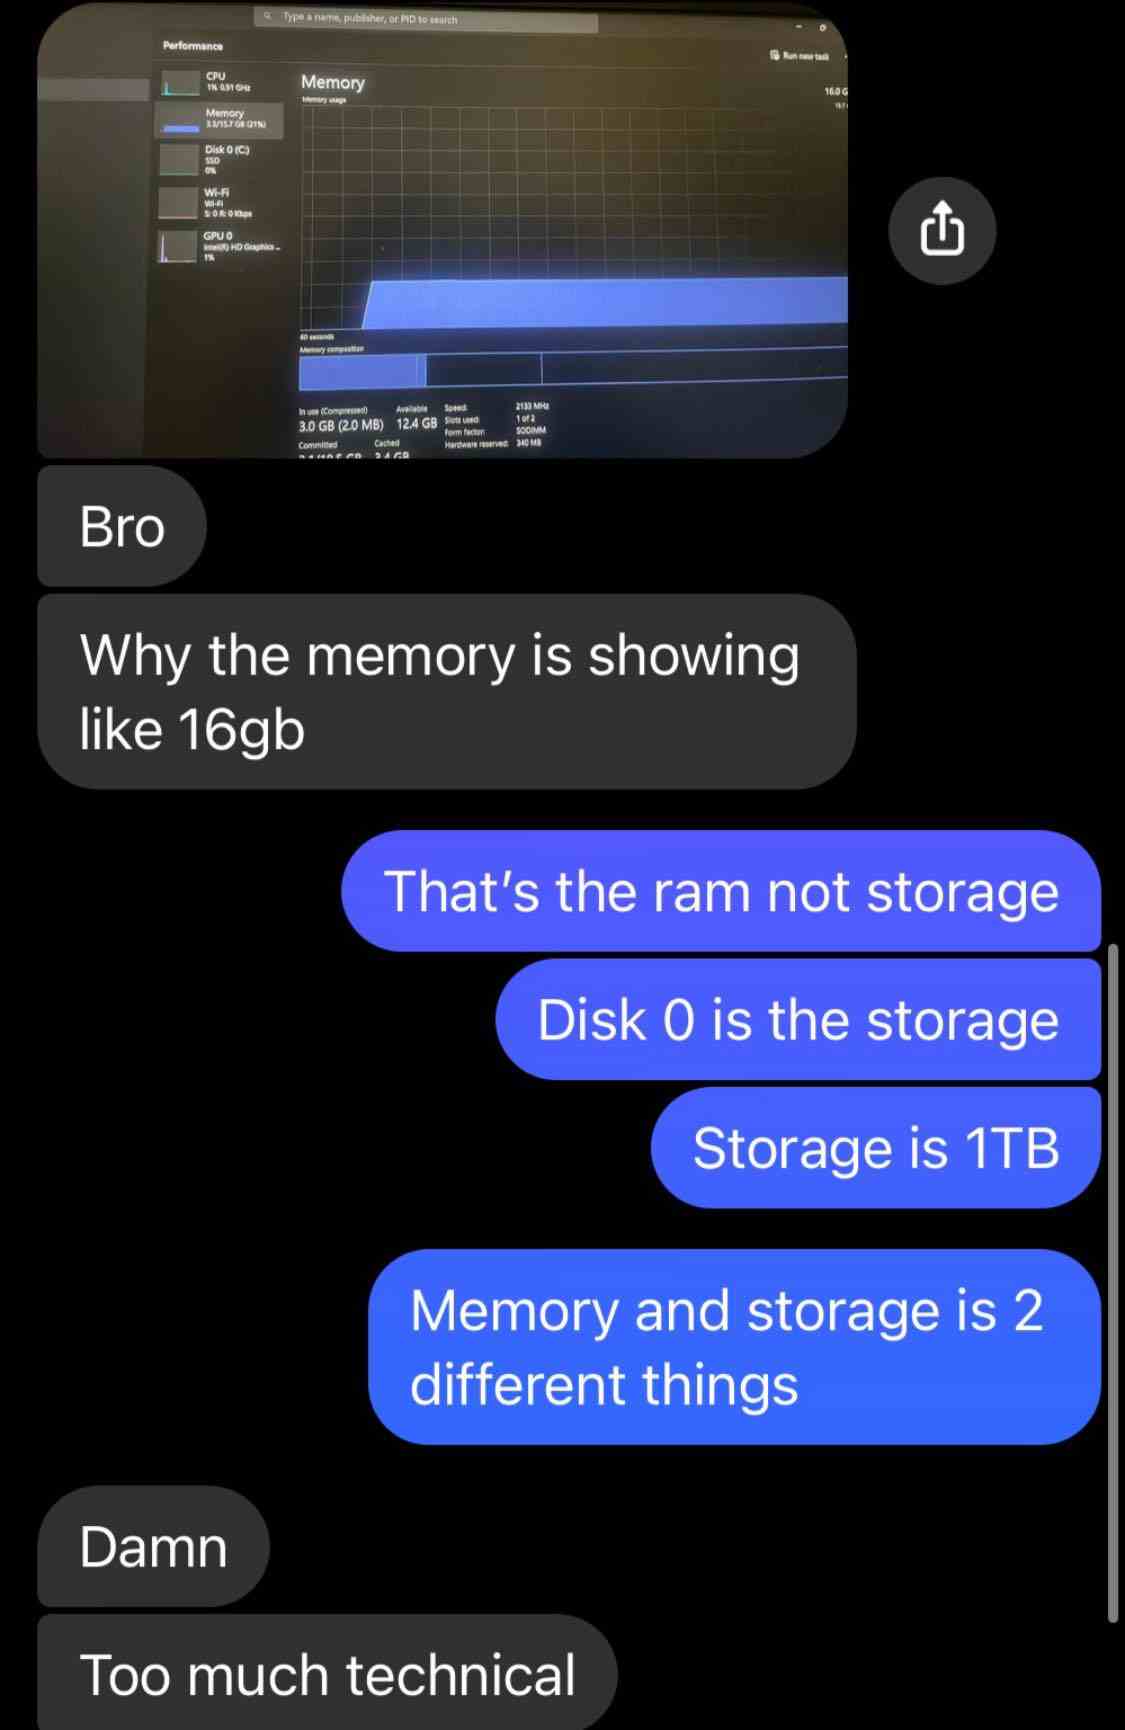 Why the memory is showing like 16GB